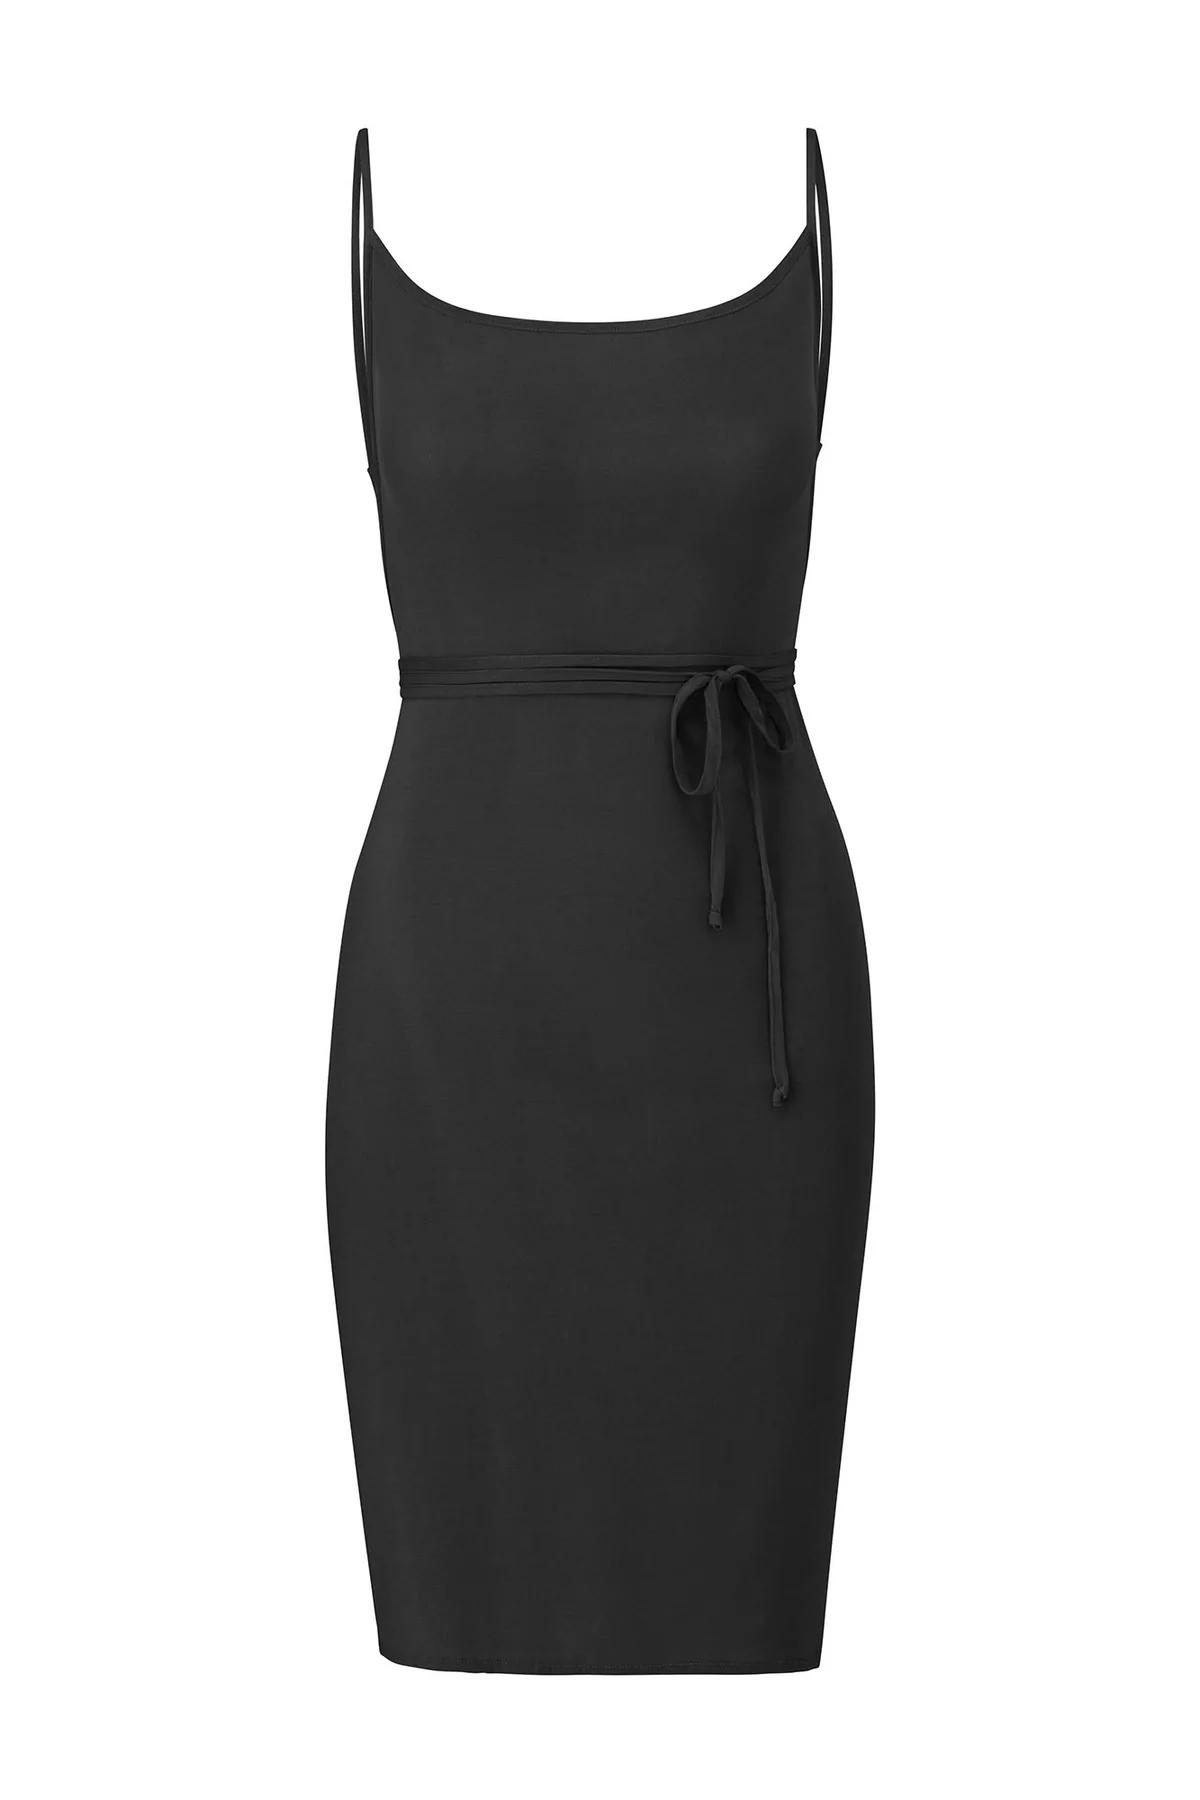 Product Image for The KM Tie Midi Dress, Black